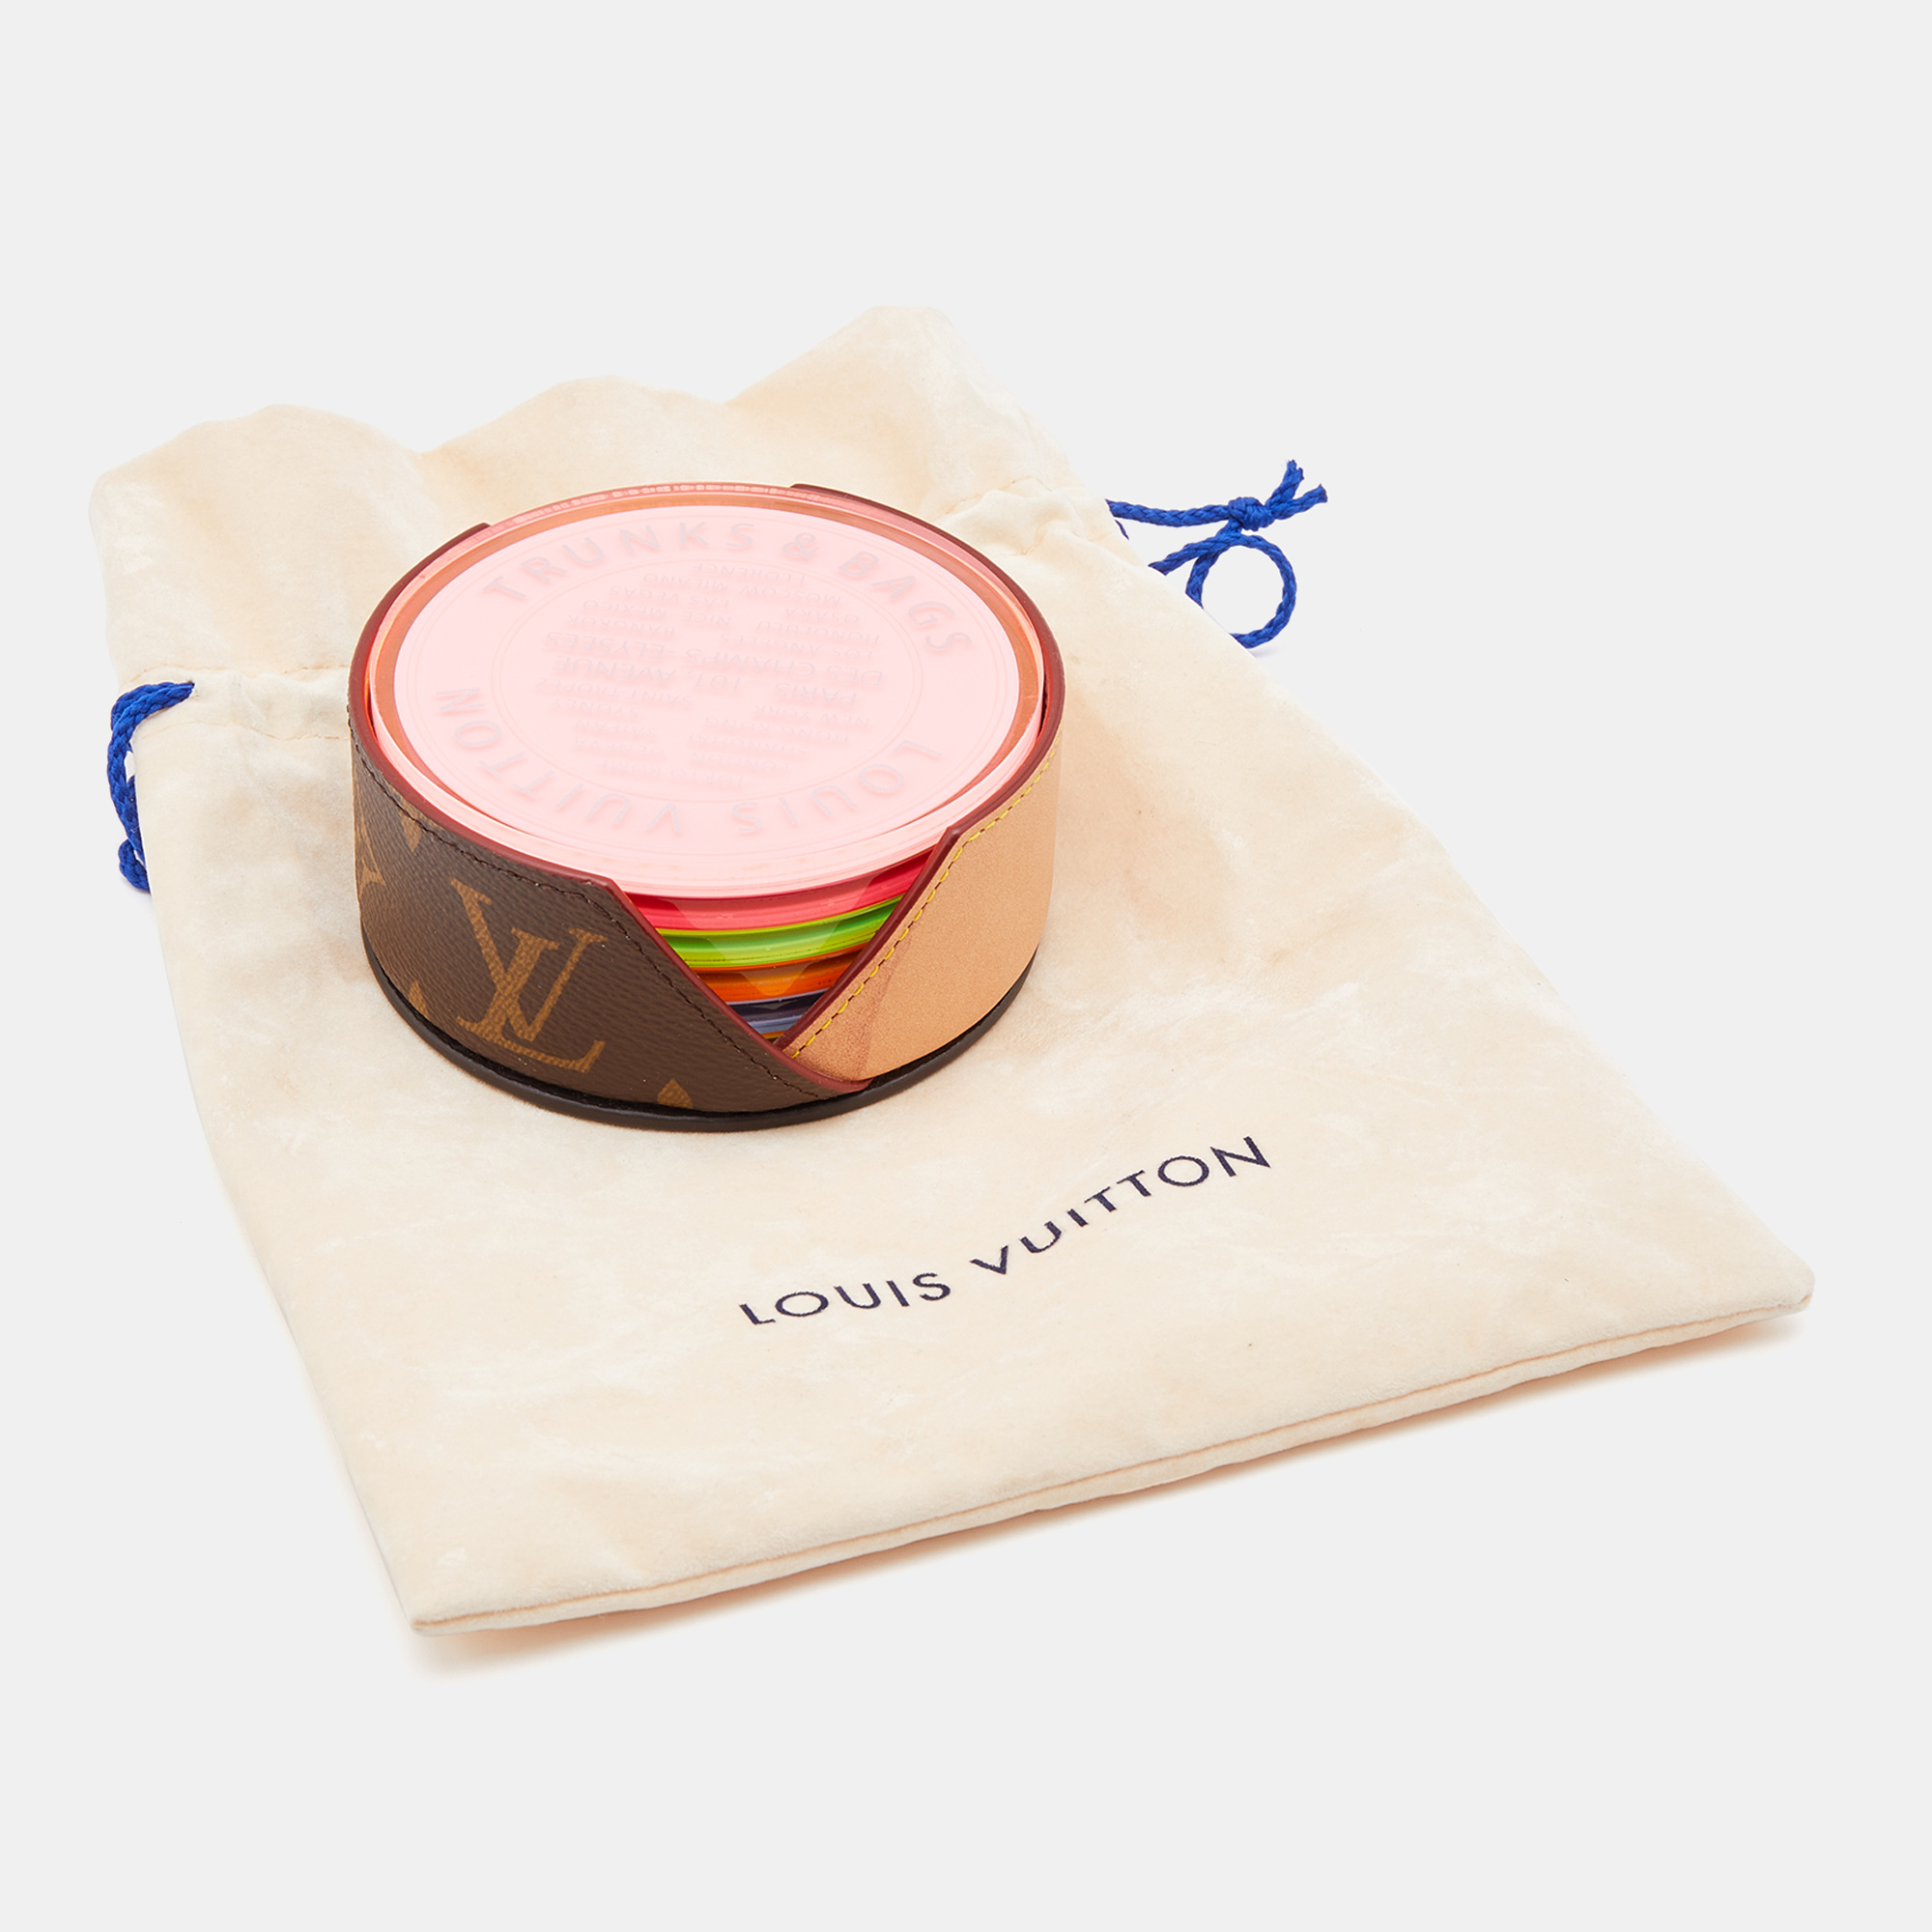 Shop Kitchenware Shipping Included Louis Vuitton x Kitchenware Monogram  fluo coasters Gifts for V Day, Boyfriend, Girlfriend